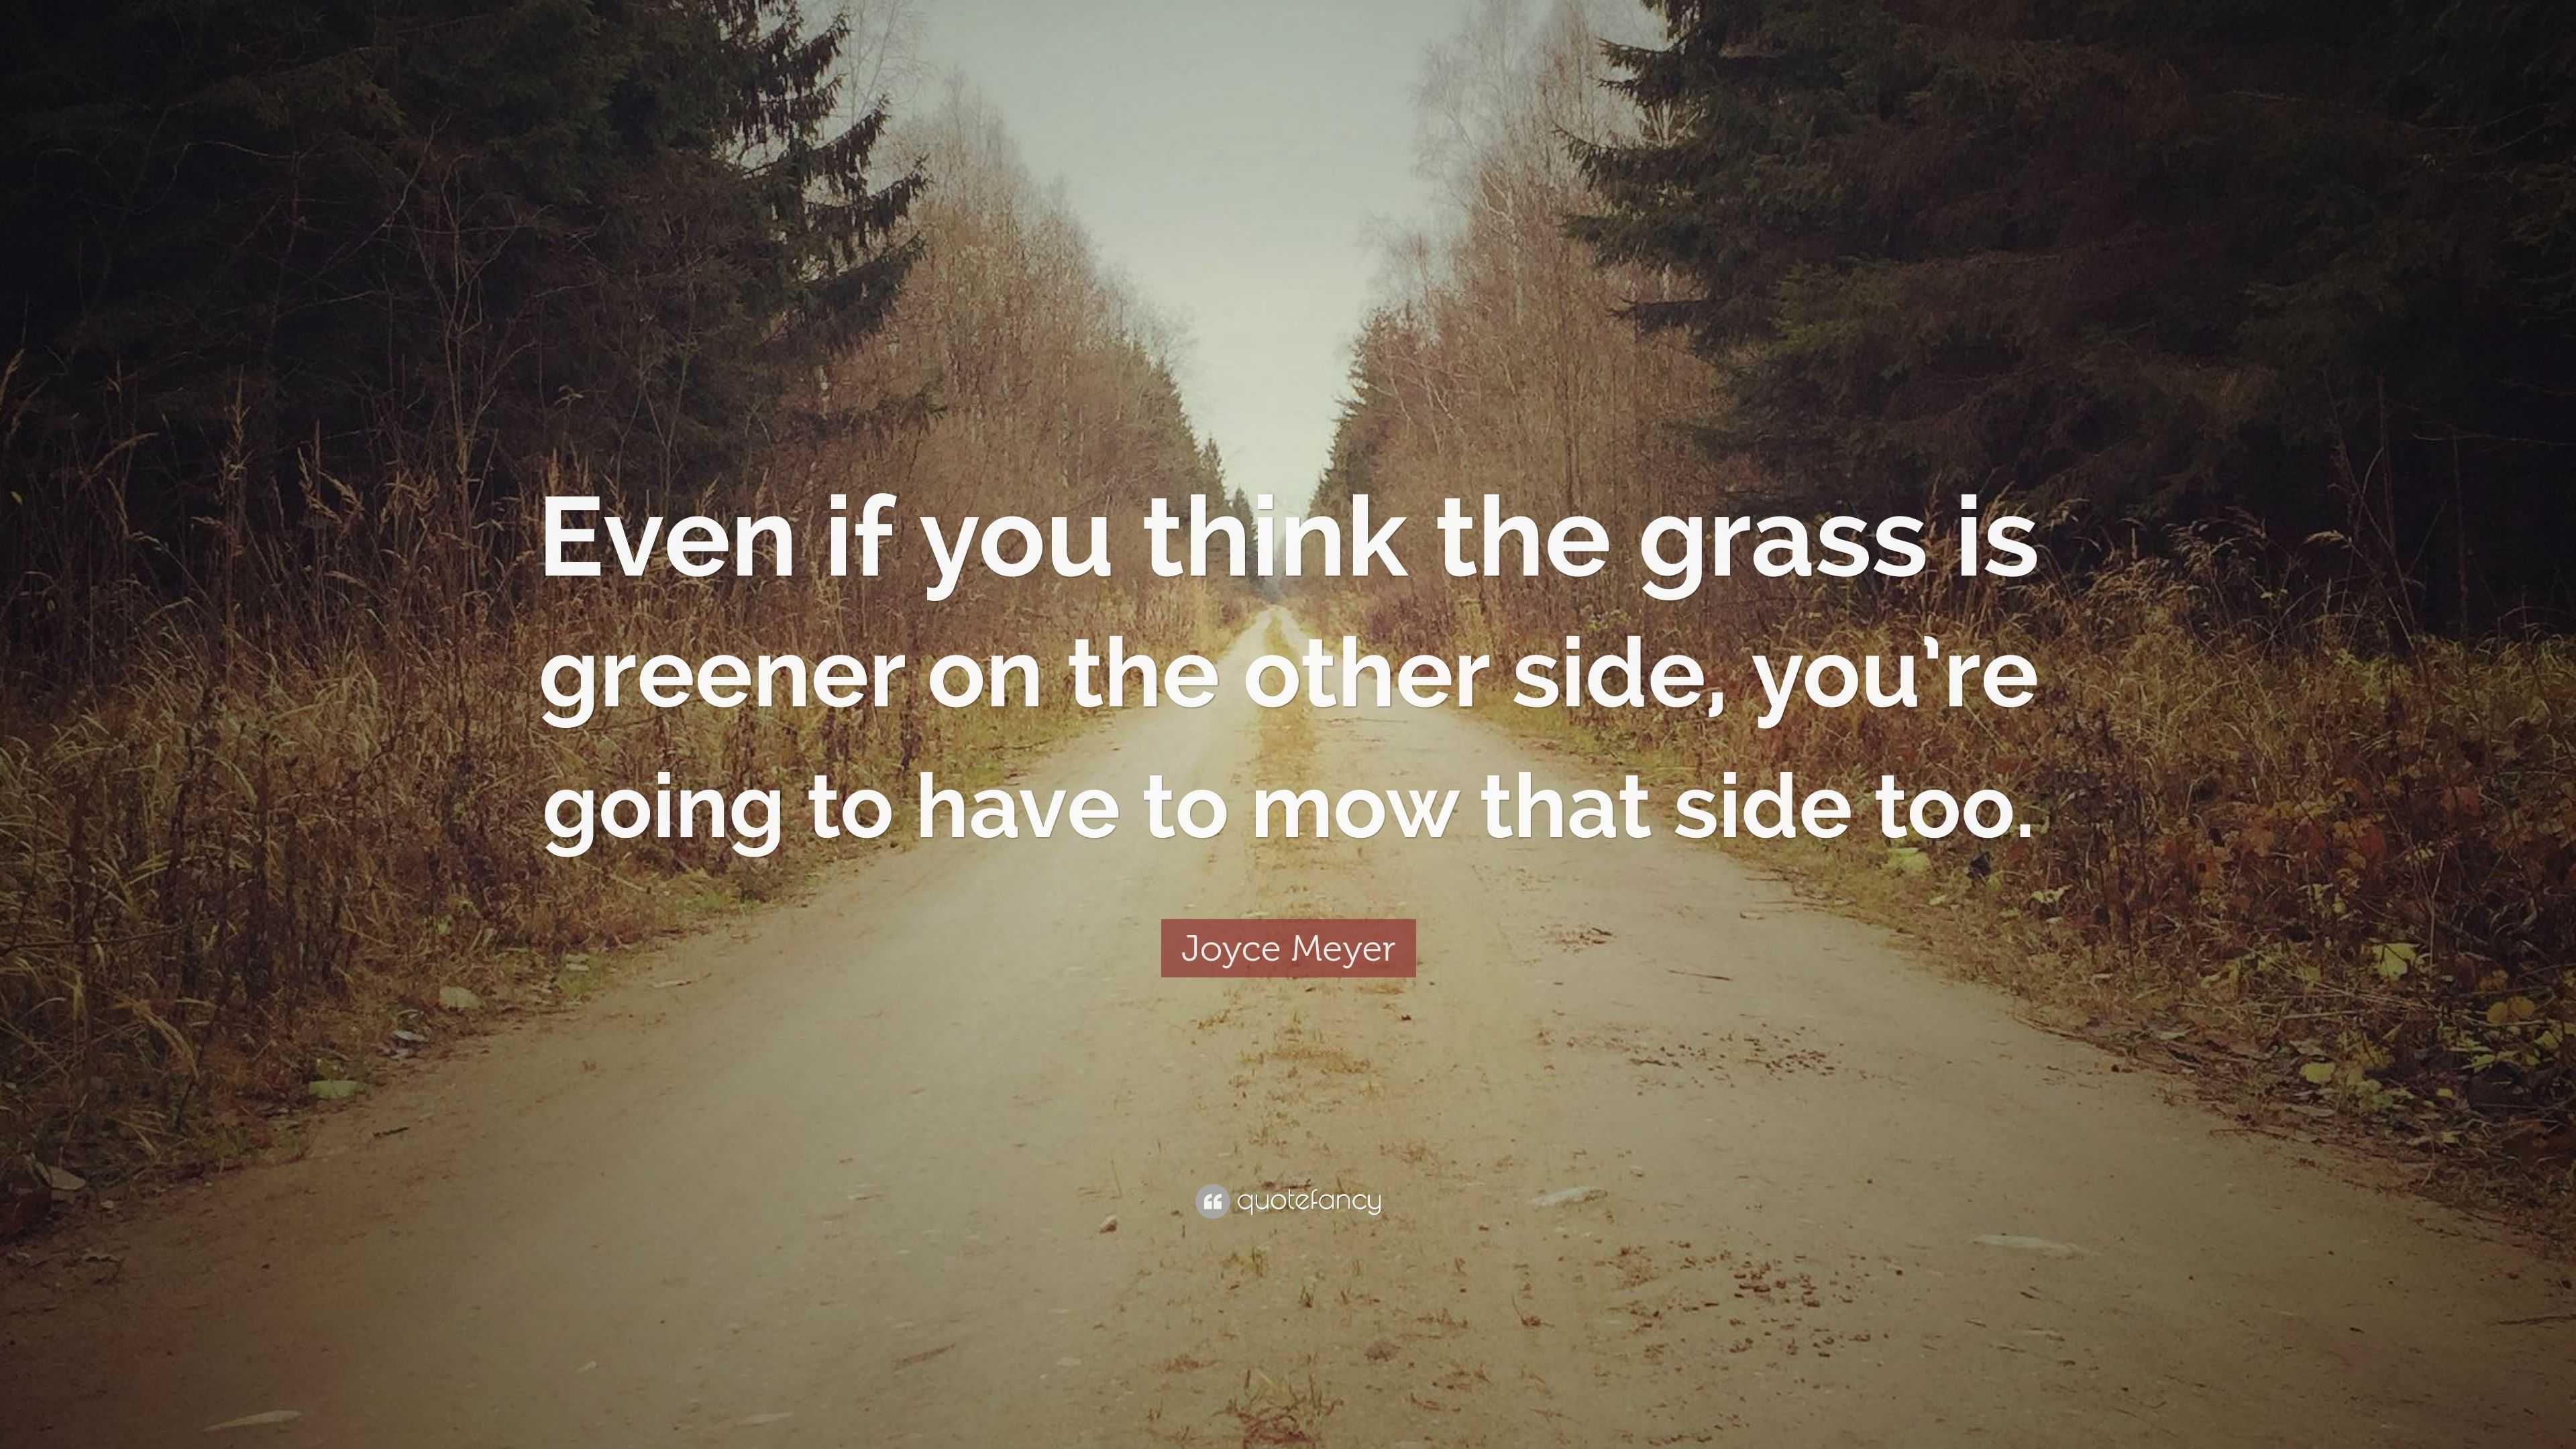 Joyce Meyer Quote “even If You Think The Grass Is Greener On The Other Side Youre Going To